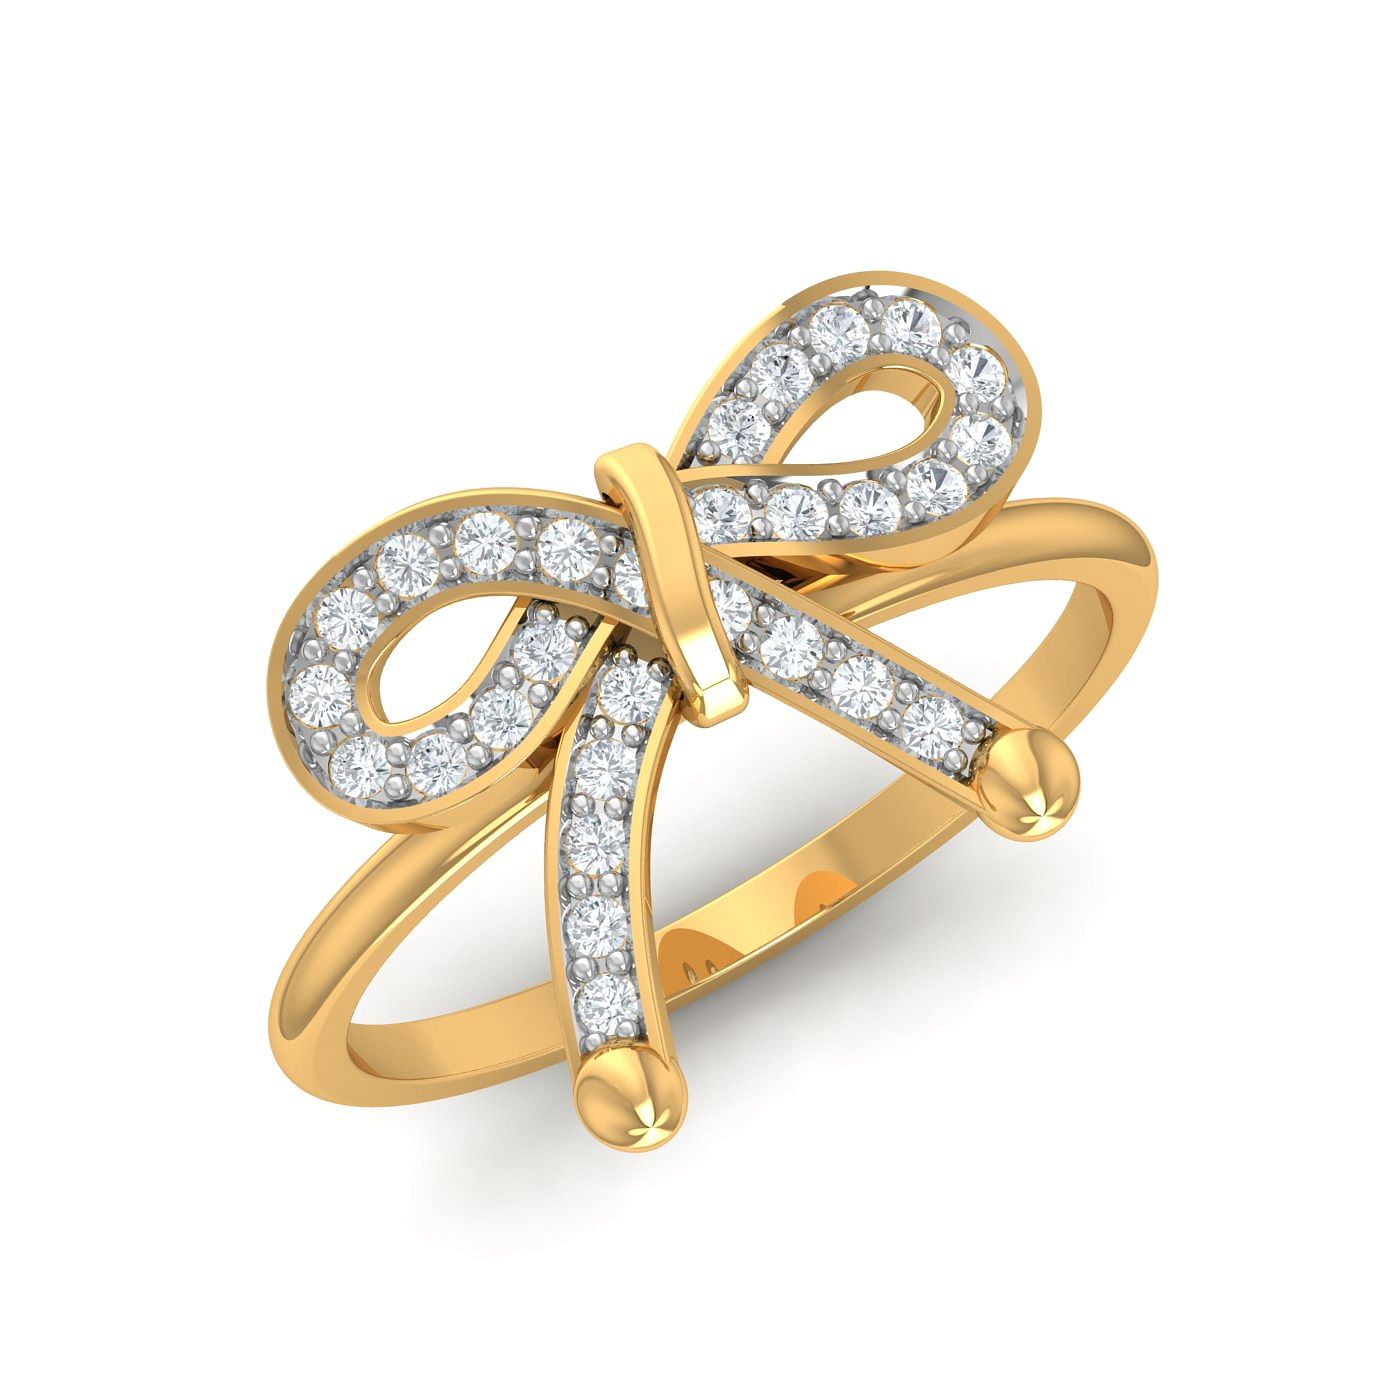 Bow Knot Diamond Ring With Yellow Gold For Women